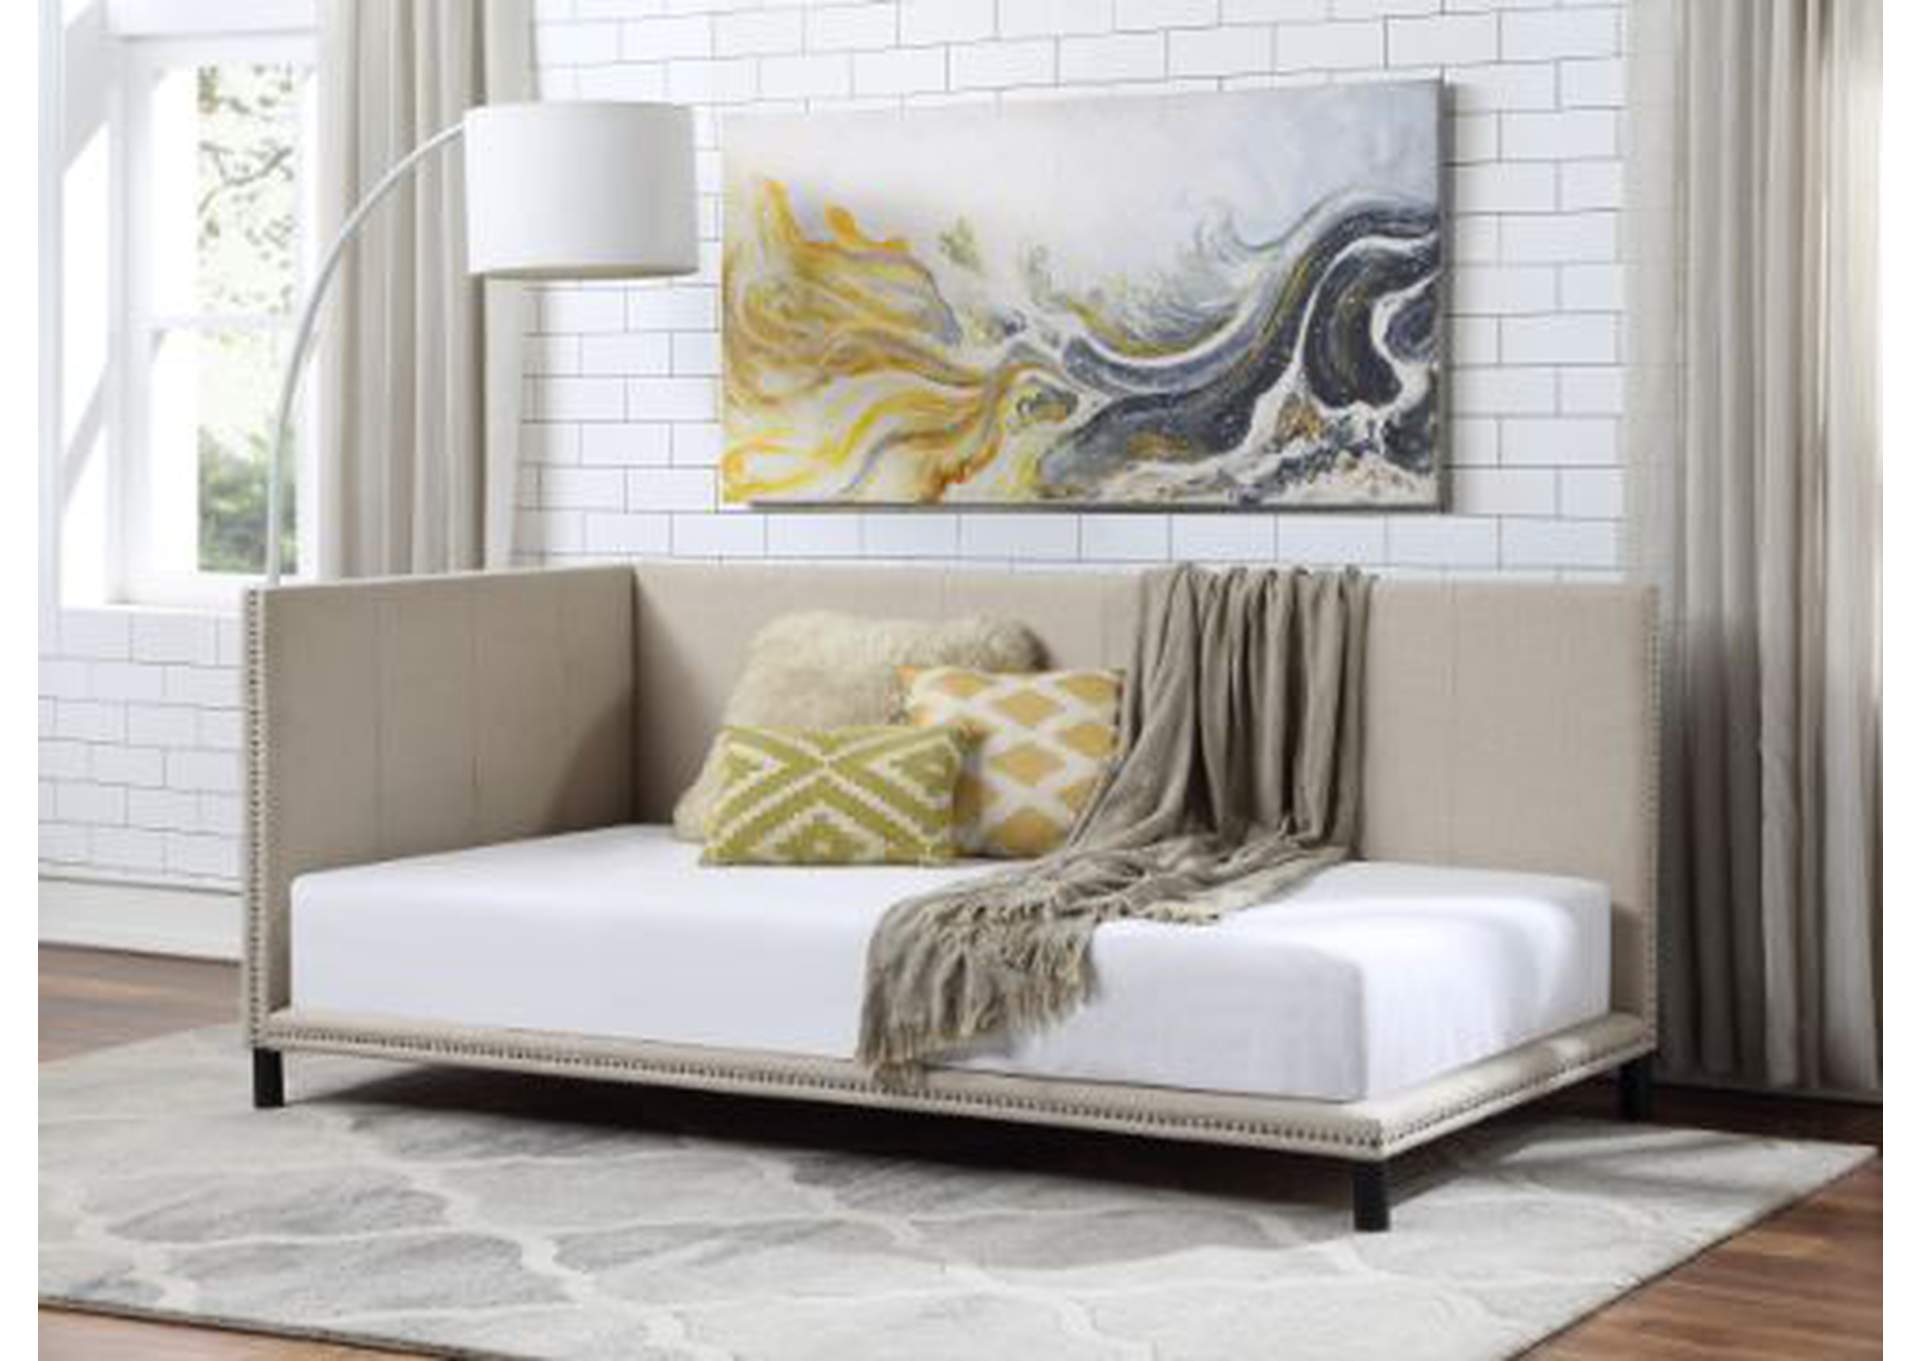 Yinbella Daybed,Acme